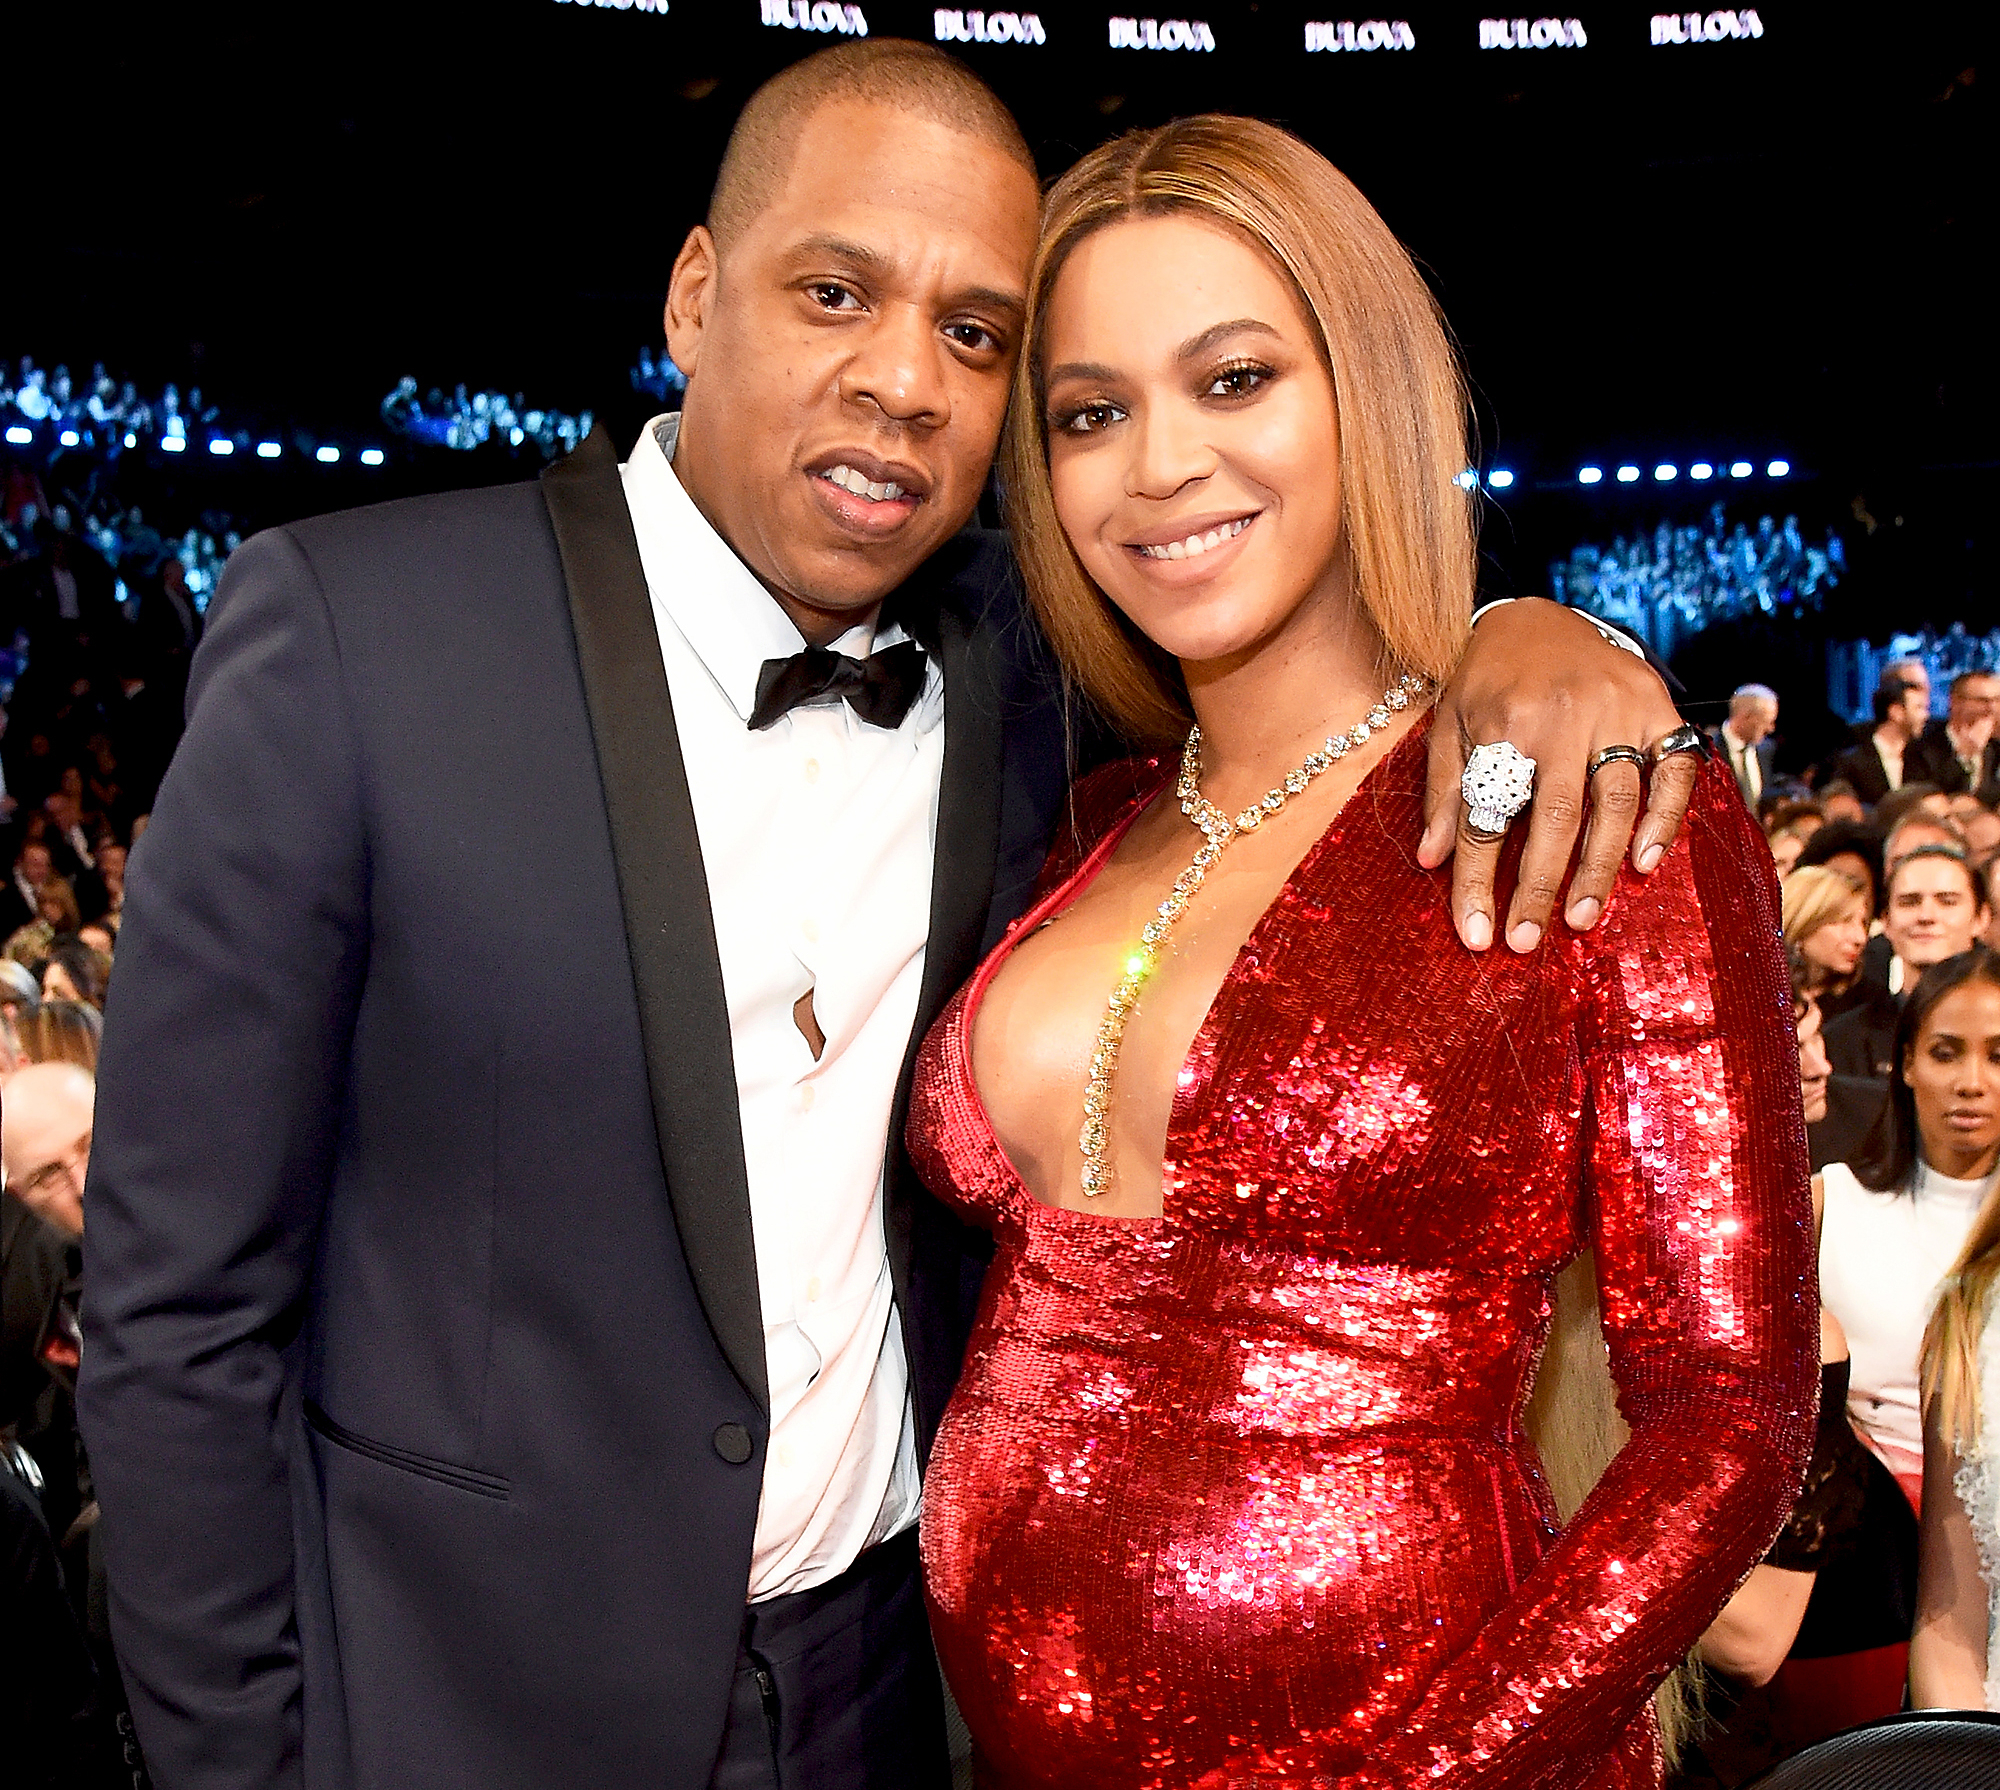 Collection 100+ Images photos of beyonce and jayz Updated